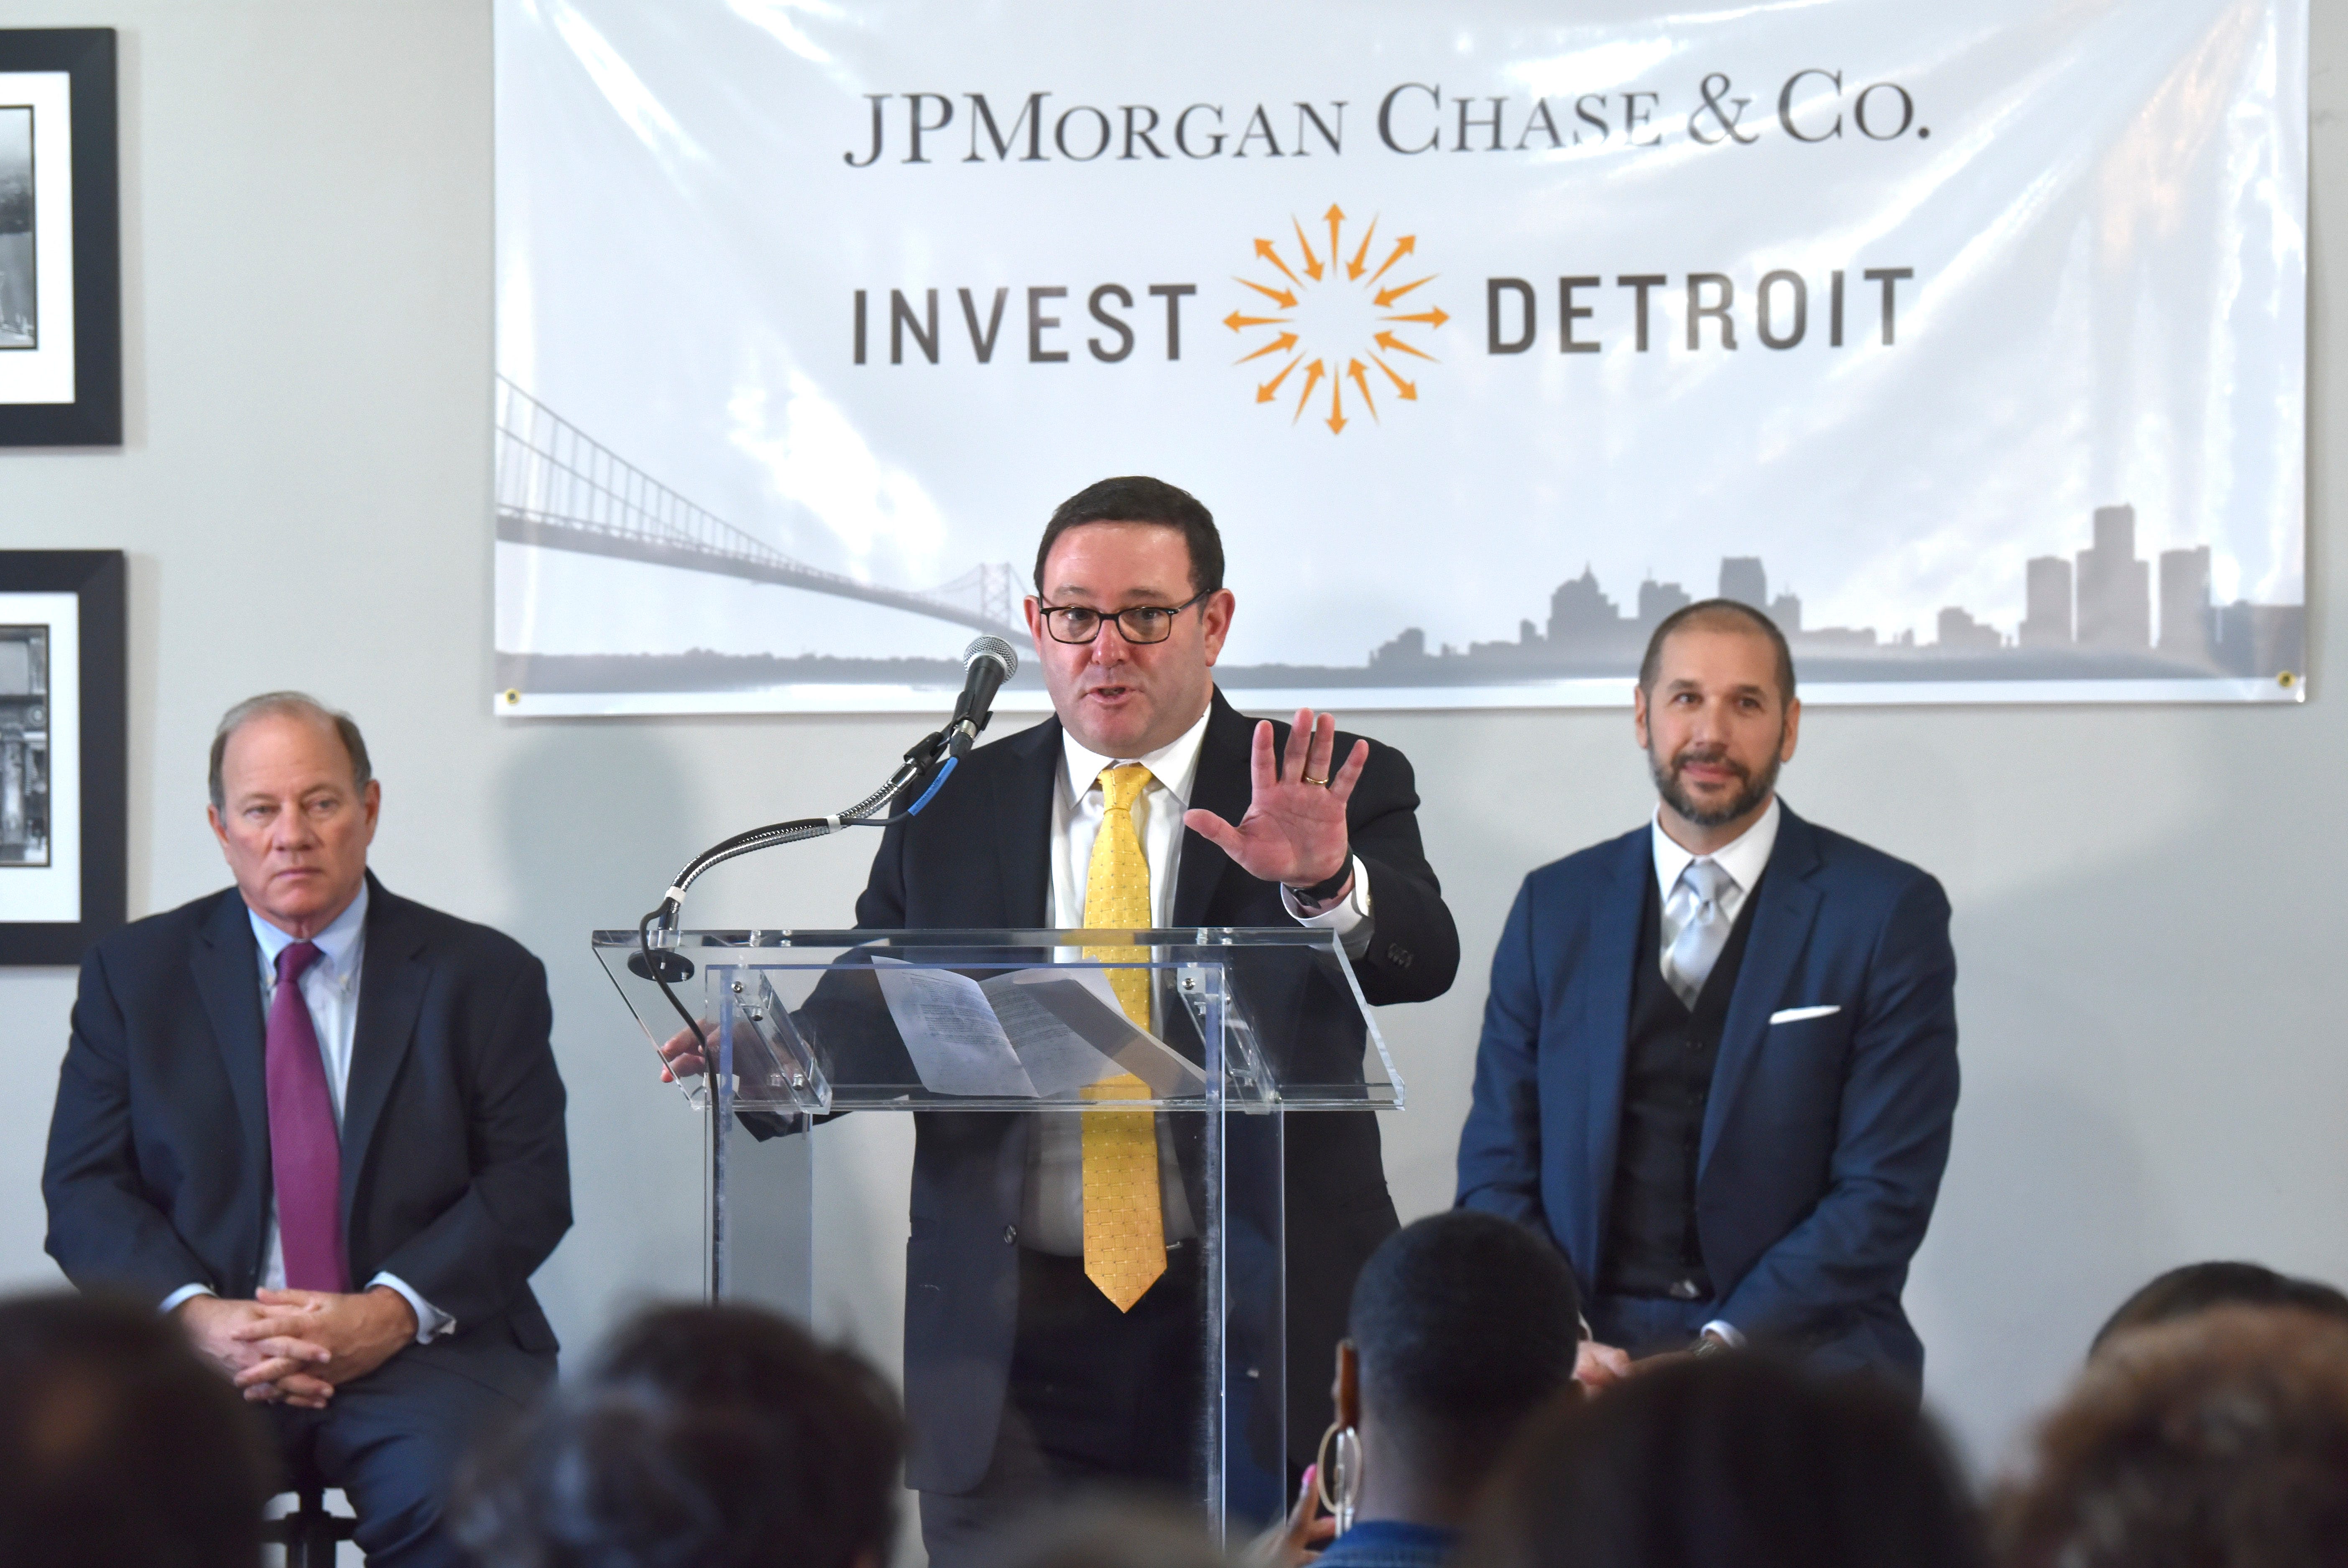 Peter Scher, center, head of corporate responsibility at JPMorgan Chase, announces a $15 investment in Detroit neighborhoods as Detroit Mayor Mike Duggan, left, and Invest Detroit CEO Dave Blaszkiewicz, right, listen.